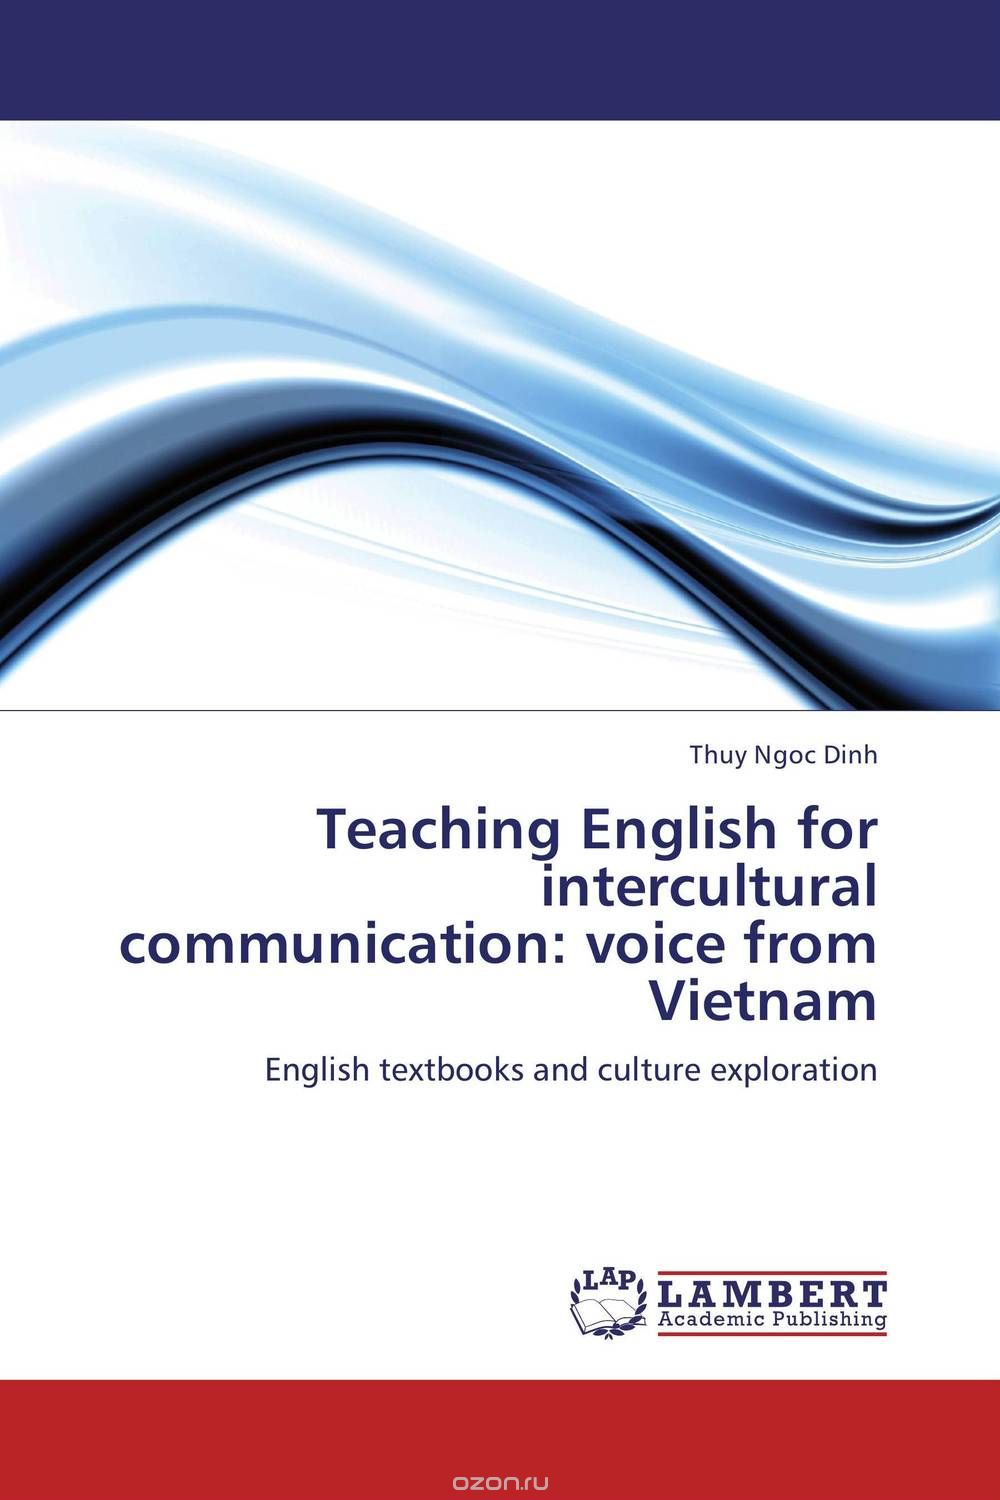 Teaching English for intercultural communication: voice from Vietnam